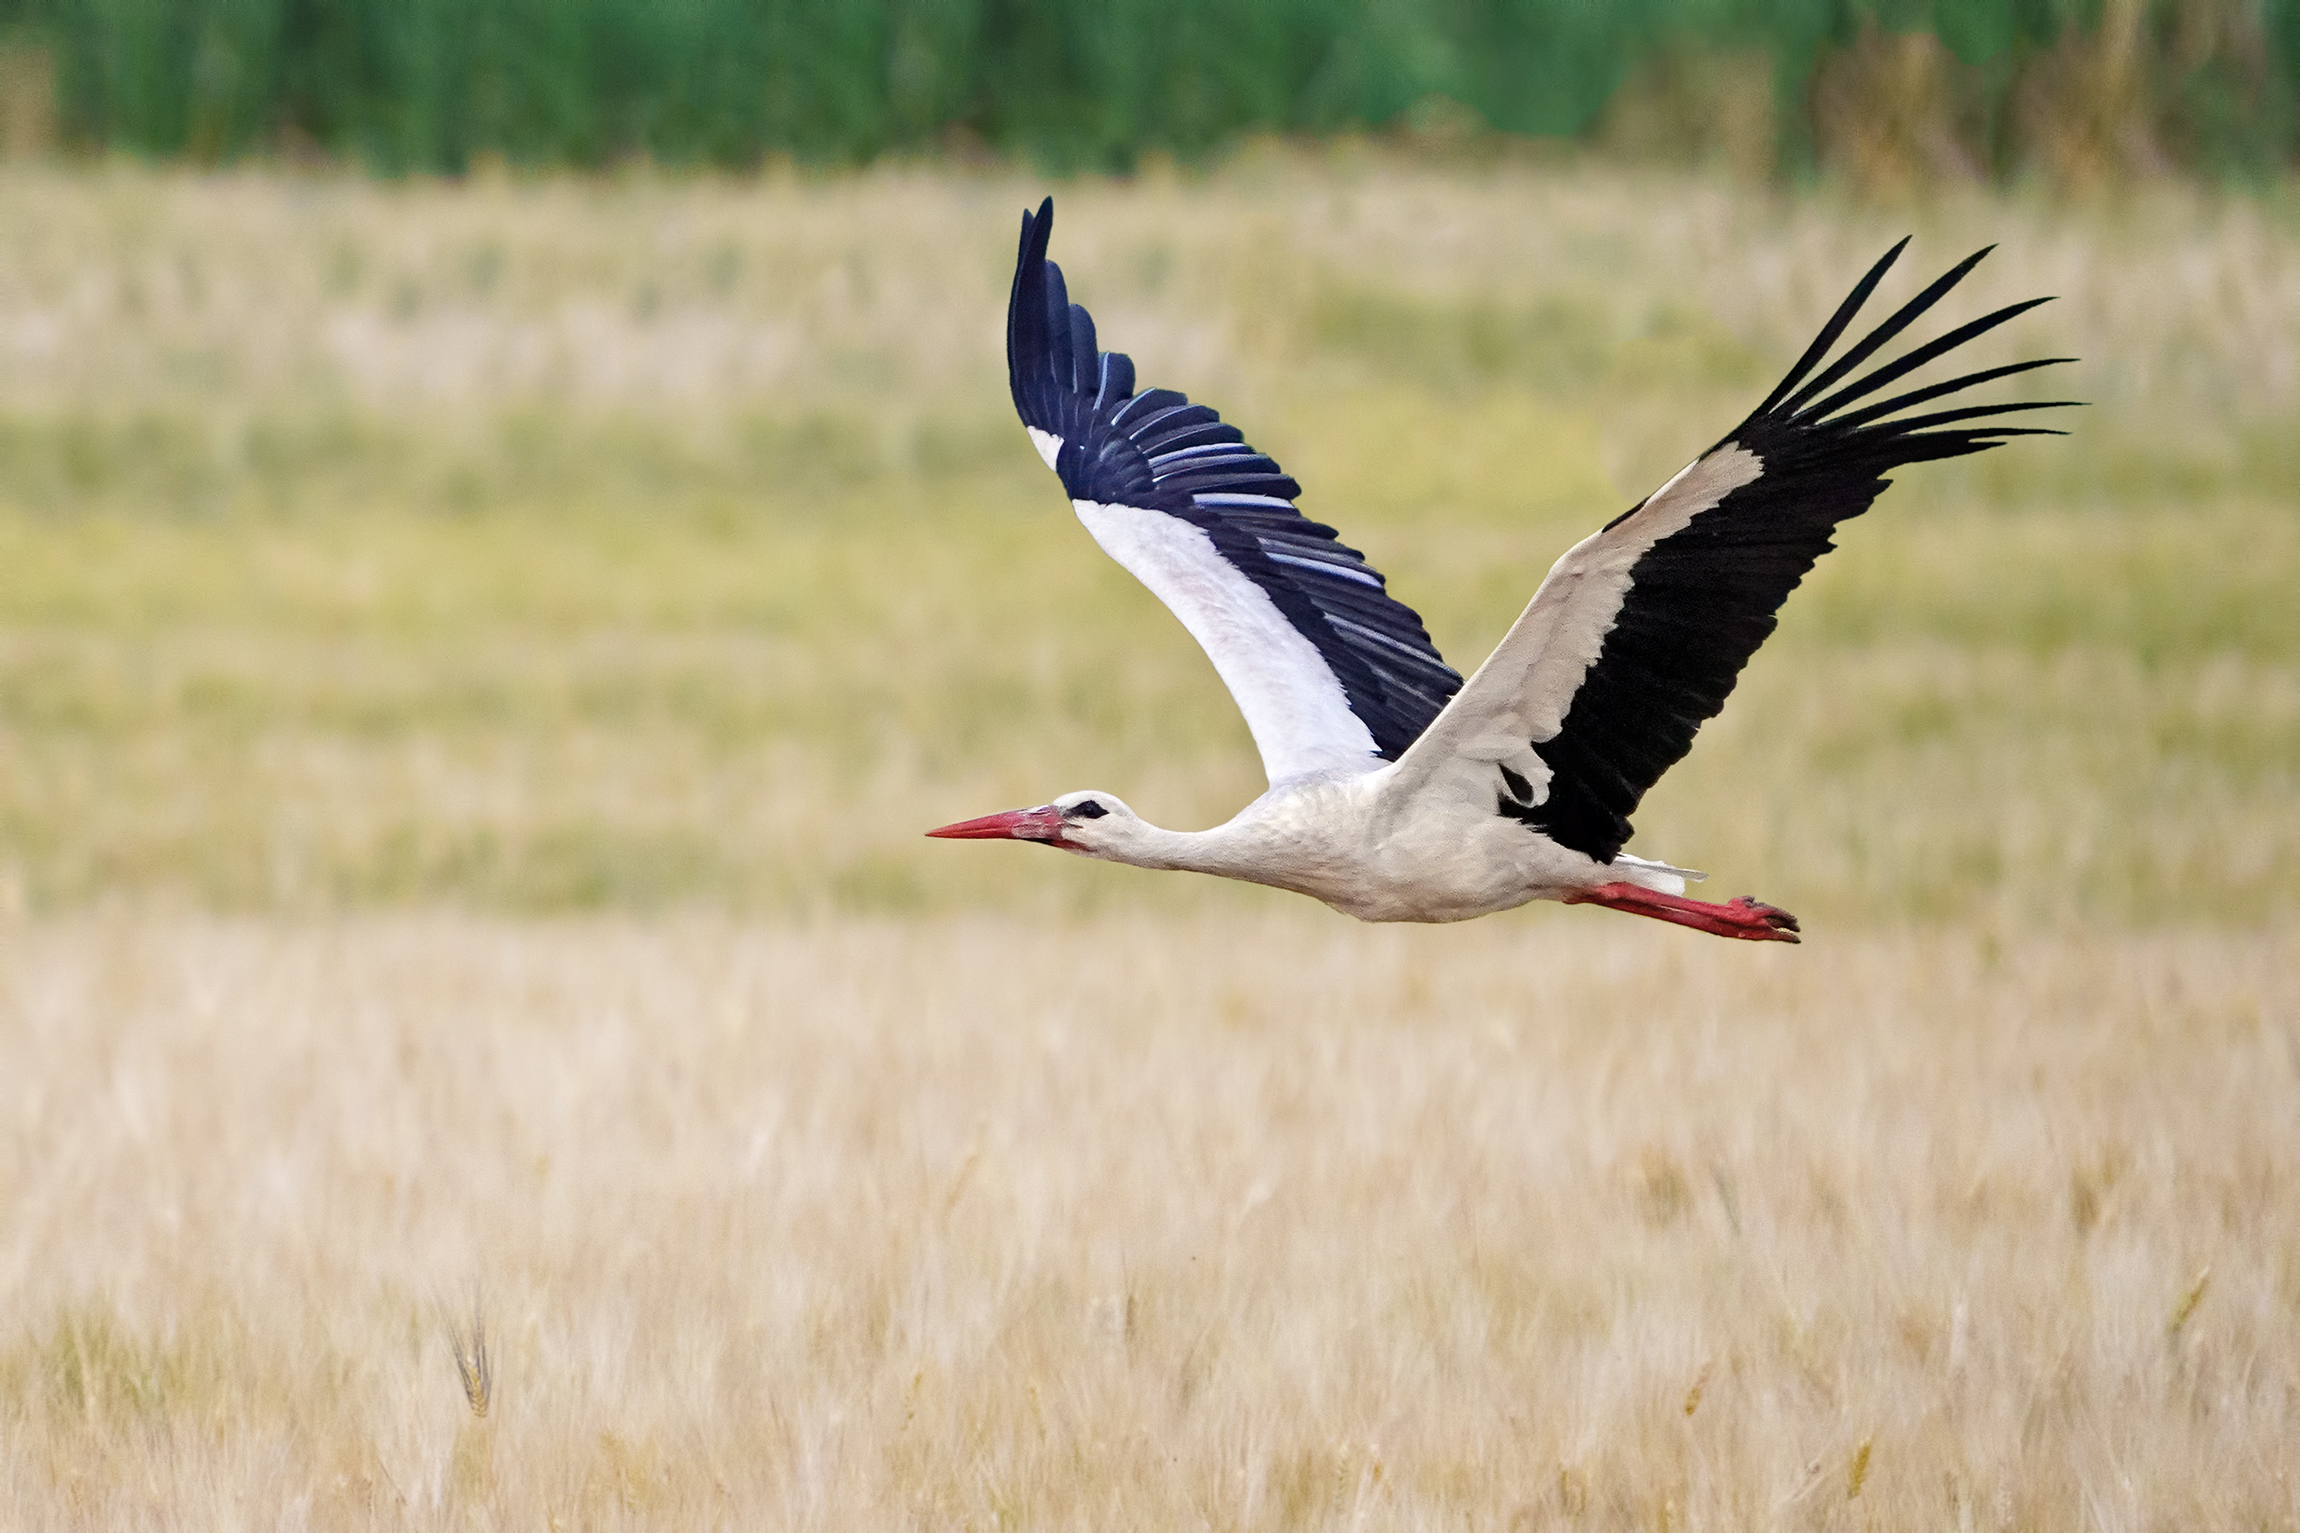 The Stork and the Wheat 3...